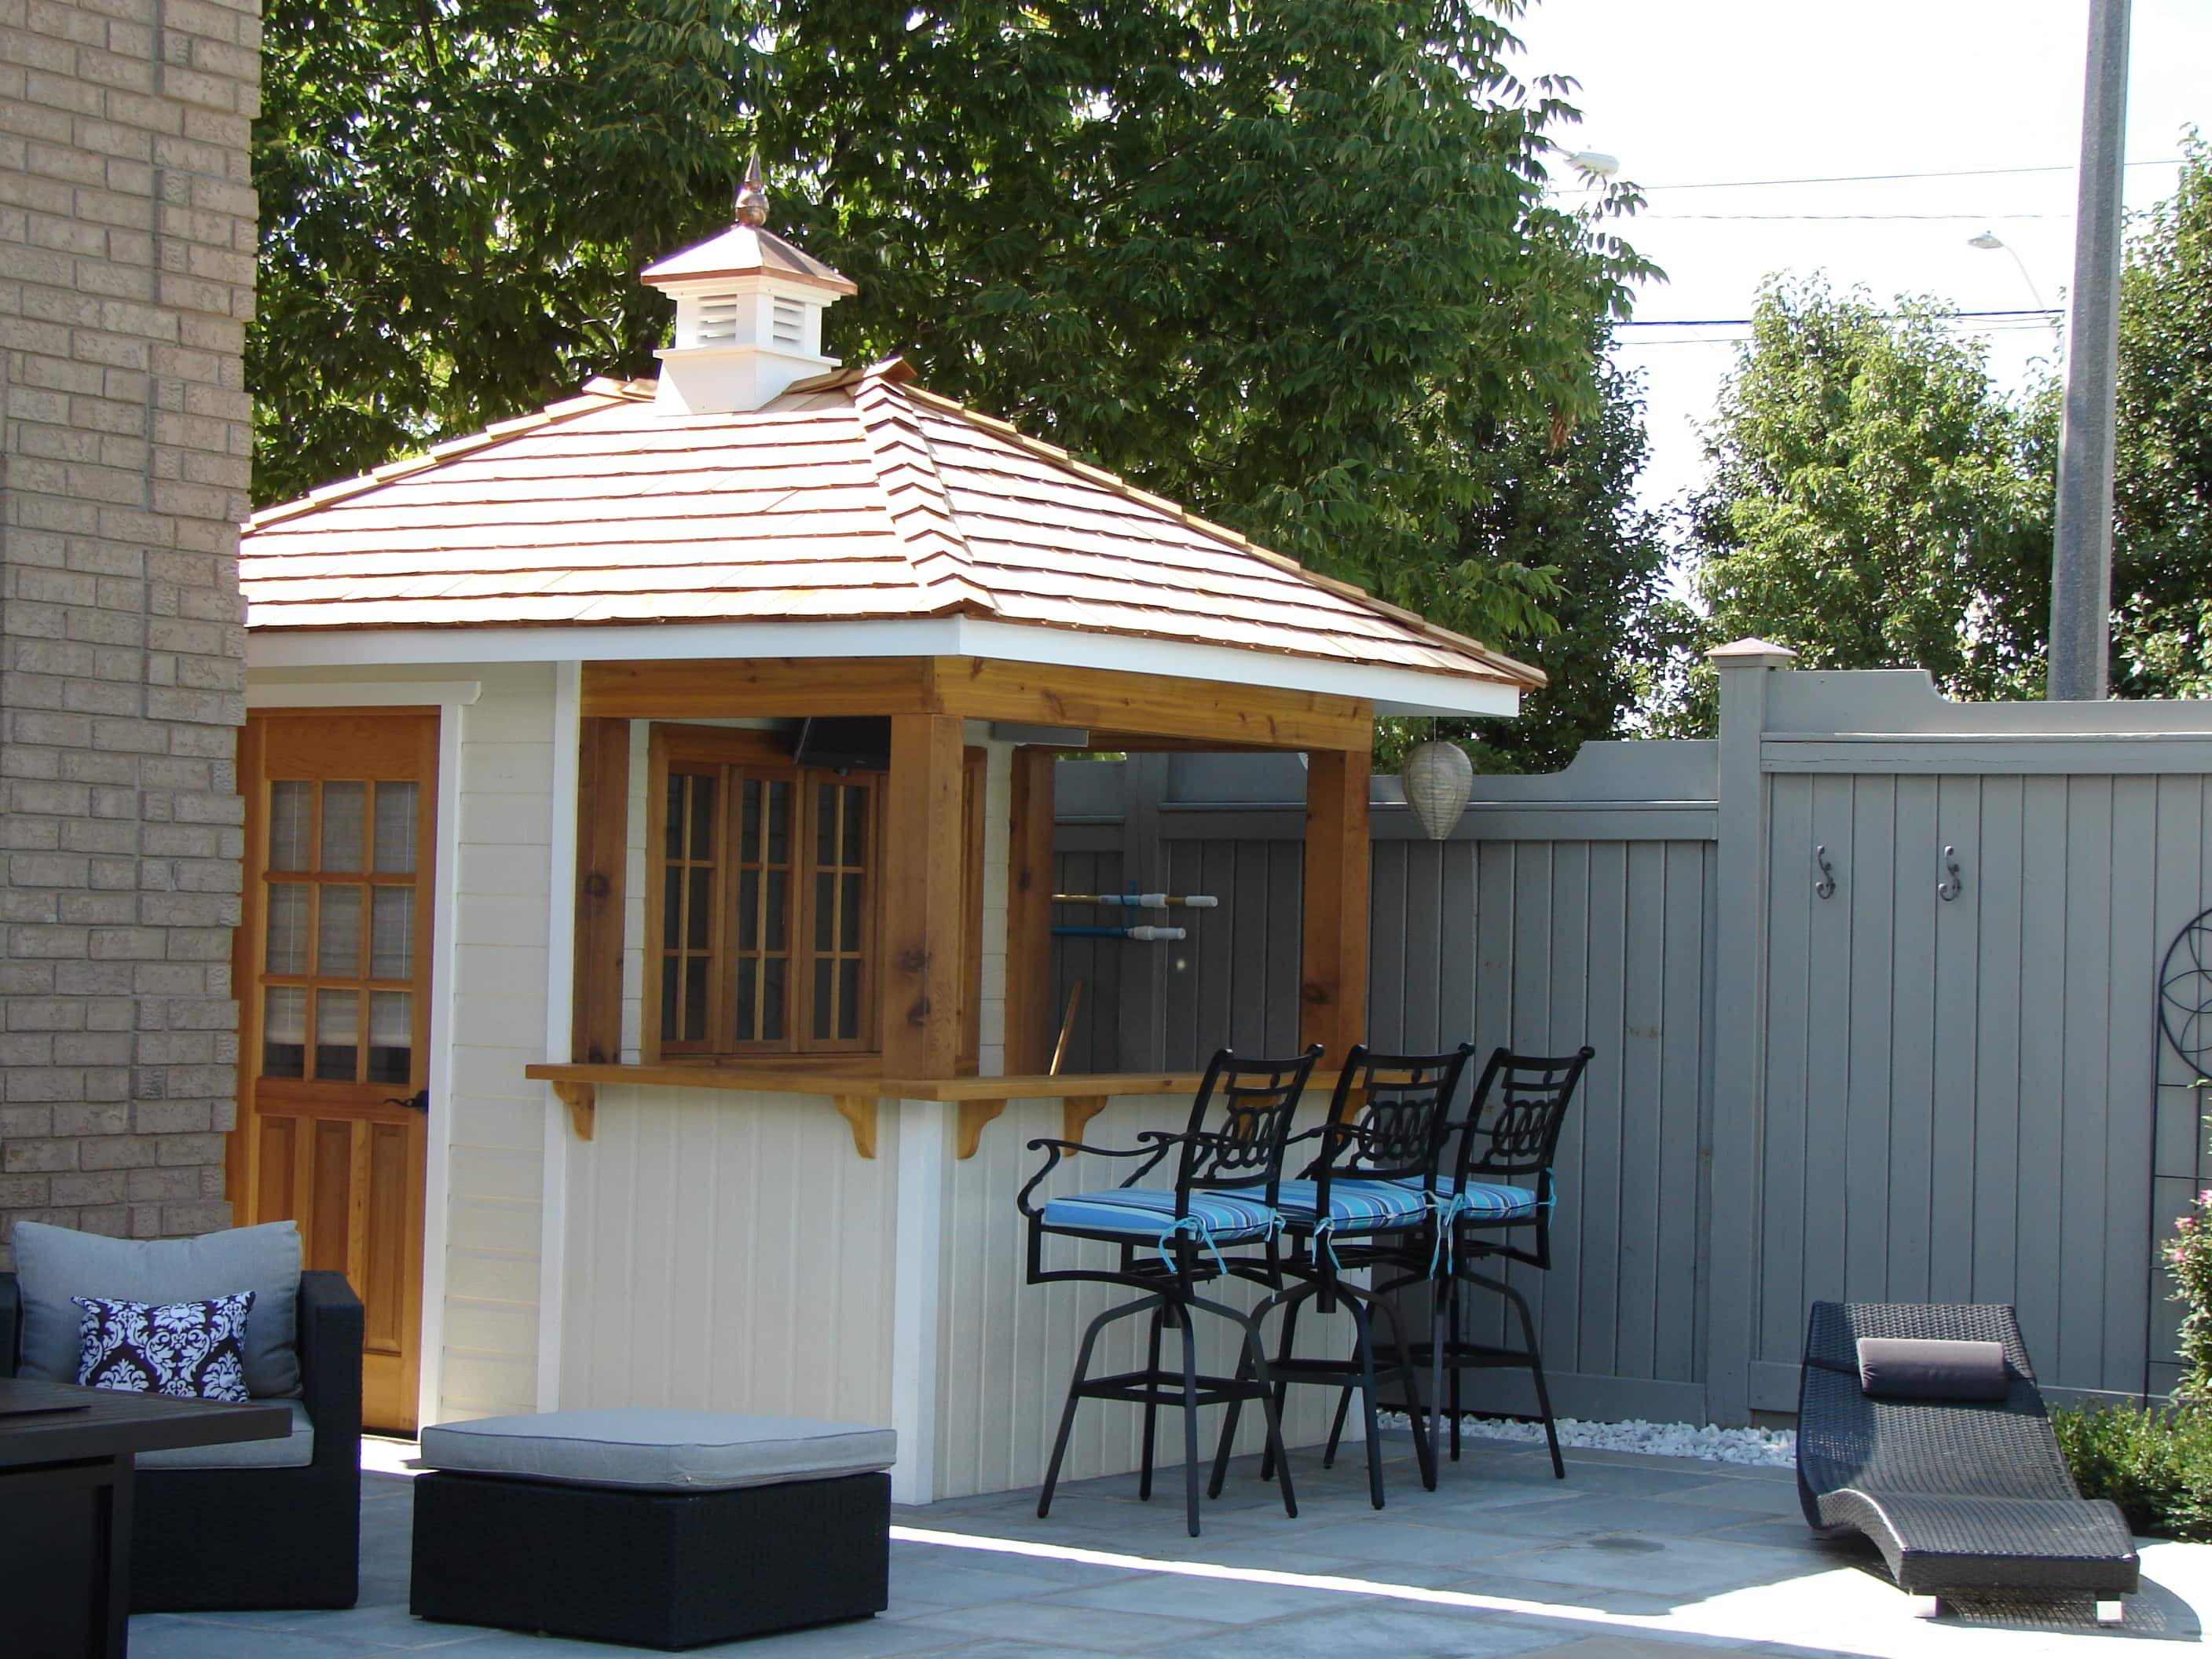 Canexel surfside 7X12 pool cabana kit in Houston Texas. ID number 151920-0.